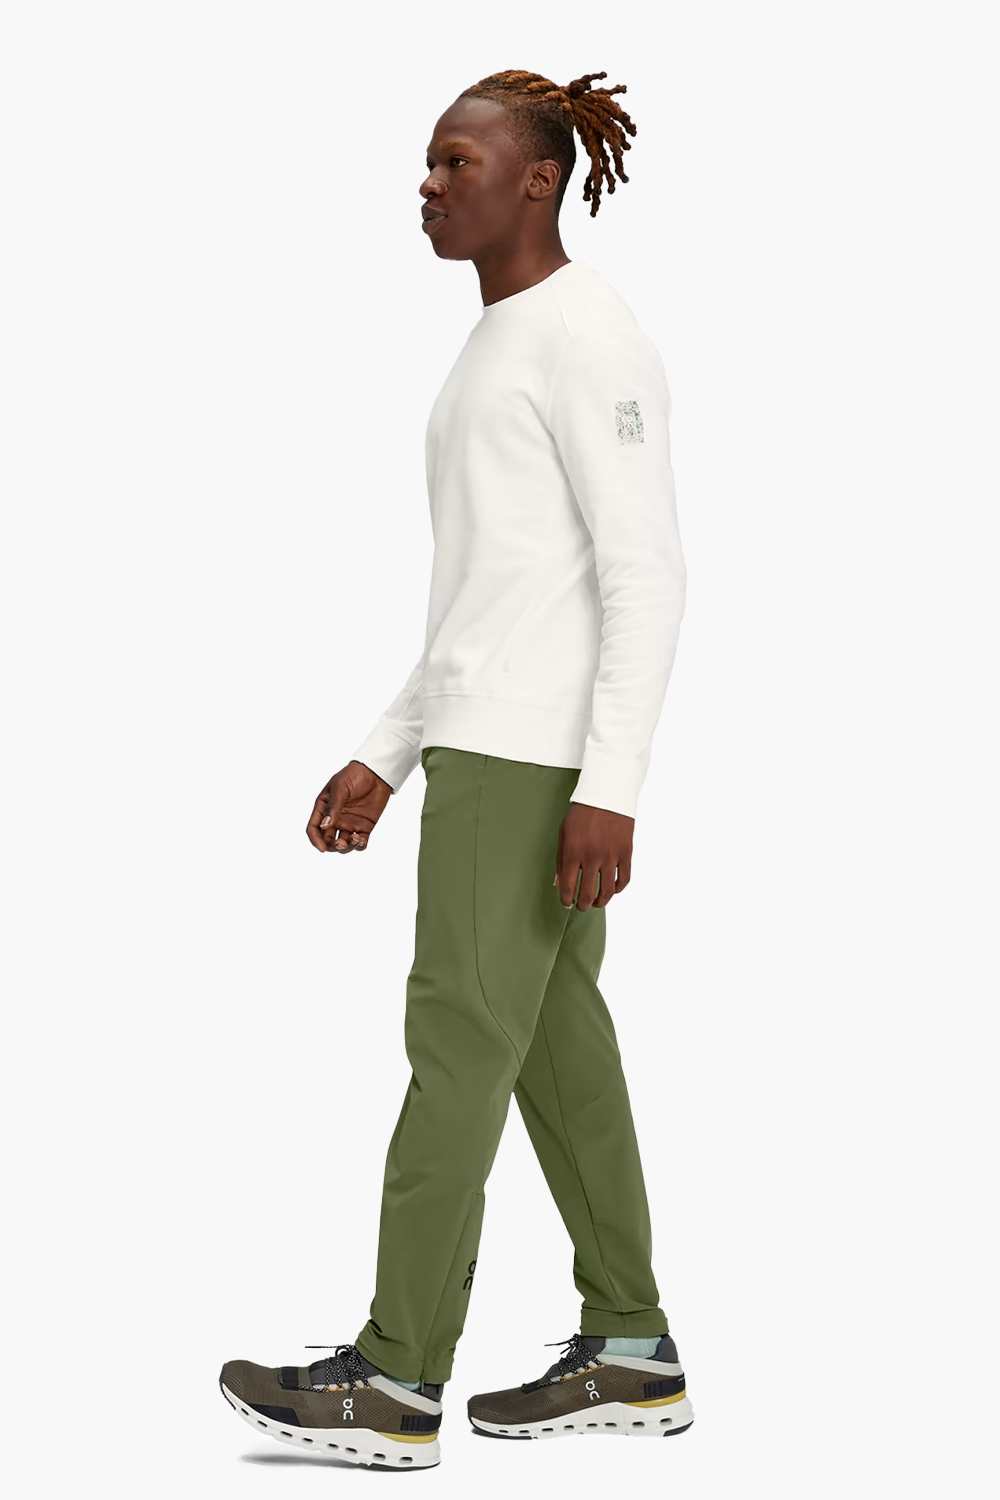 ON | Men's Active Pants in Taiga